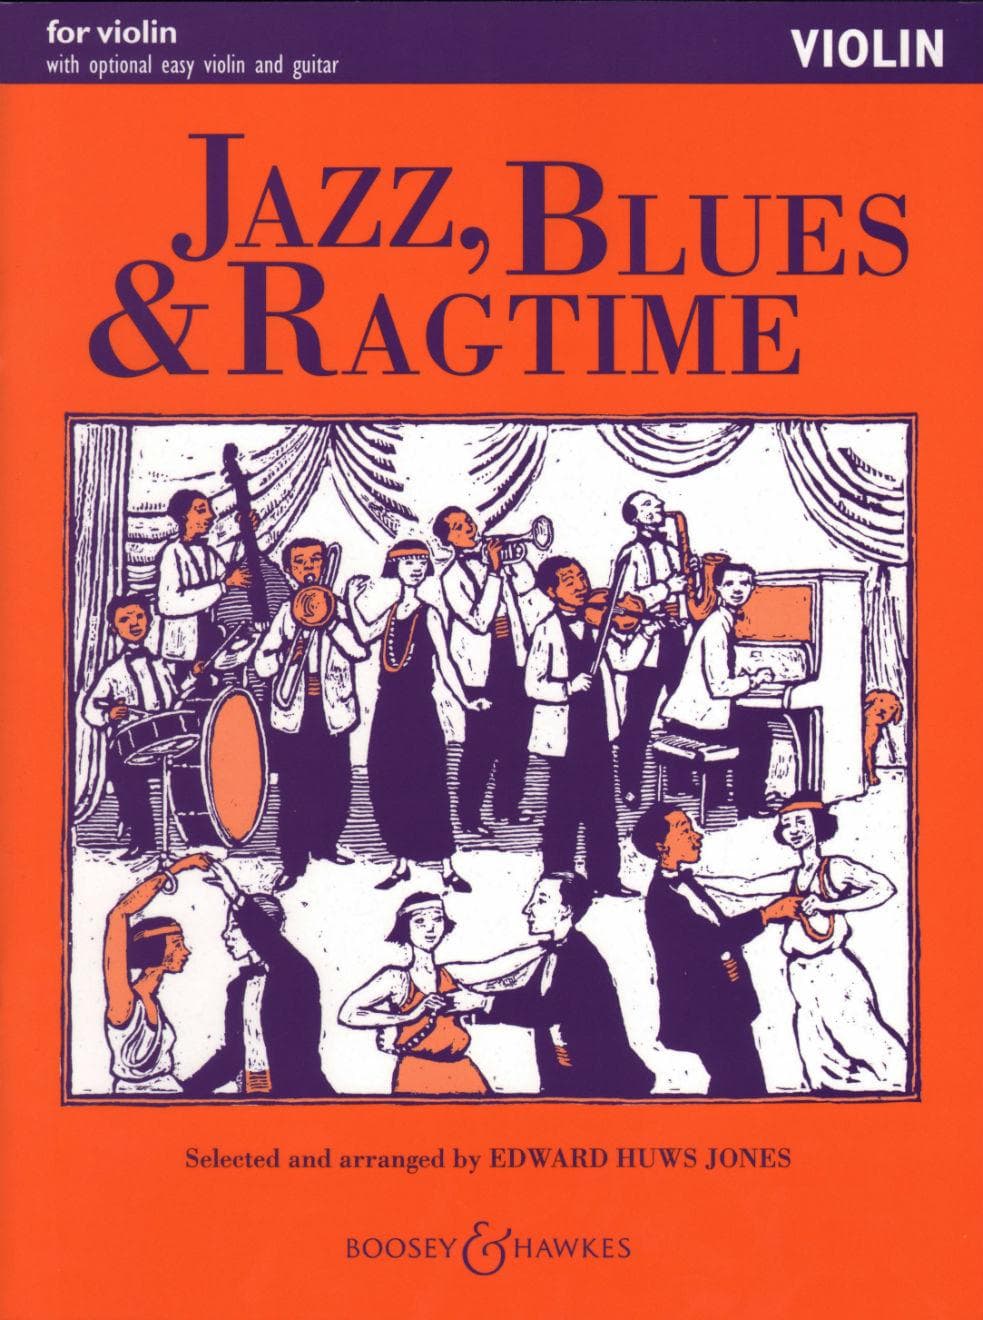 Jones, Edward Huws - Jazz, Blues, and Ragtime - Violin part ONLY - Boosey & Hawkes Edition